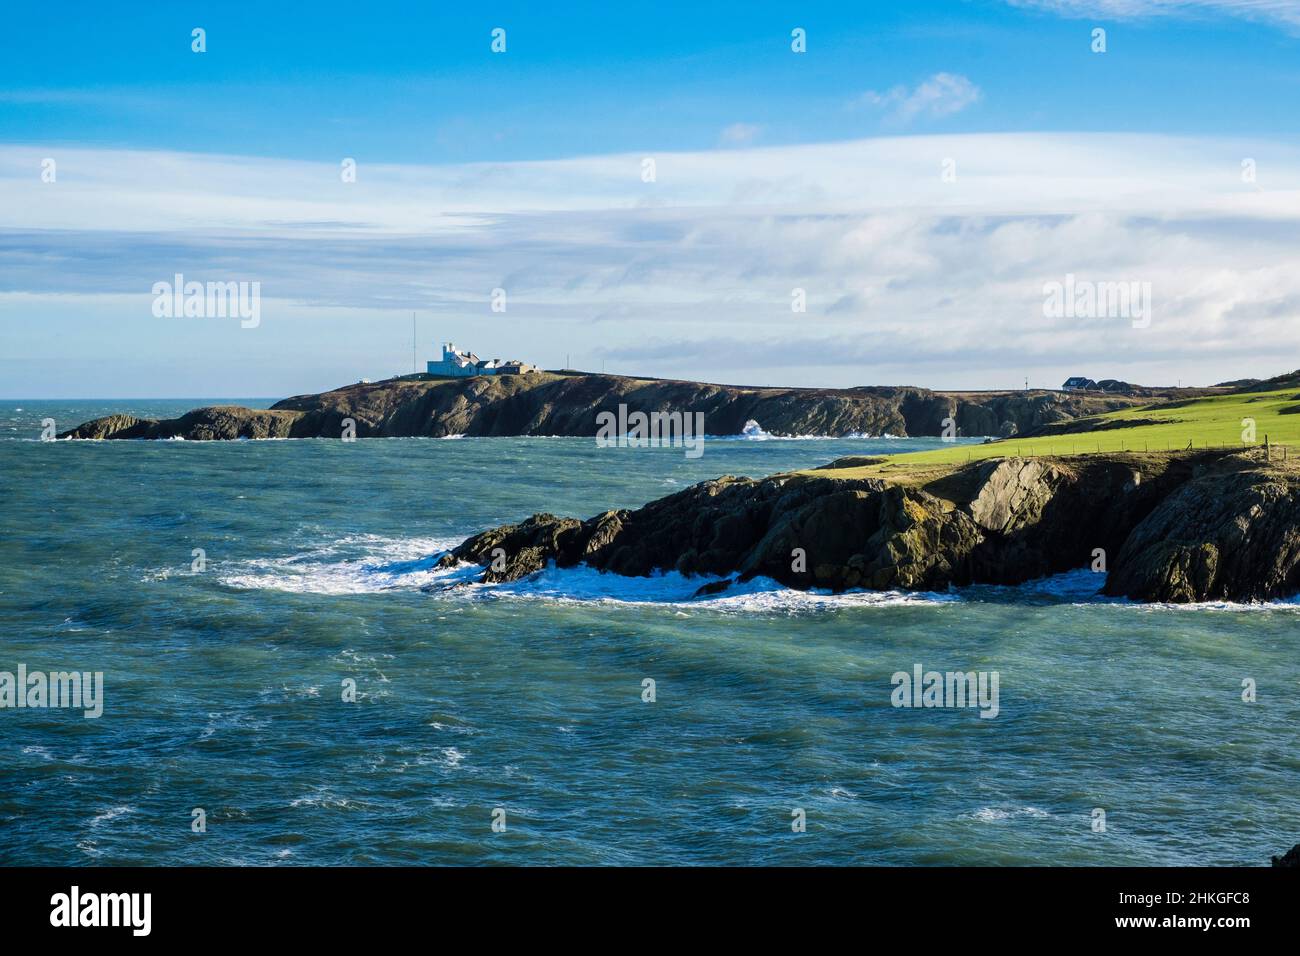 View to Point Lynas along rocky coastline. Llaneilian, Amlwch, Isle of Anglesey, north Wales, UK, Britain Stock Photo